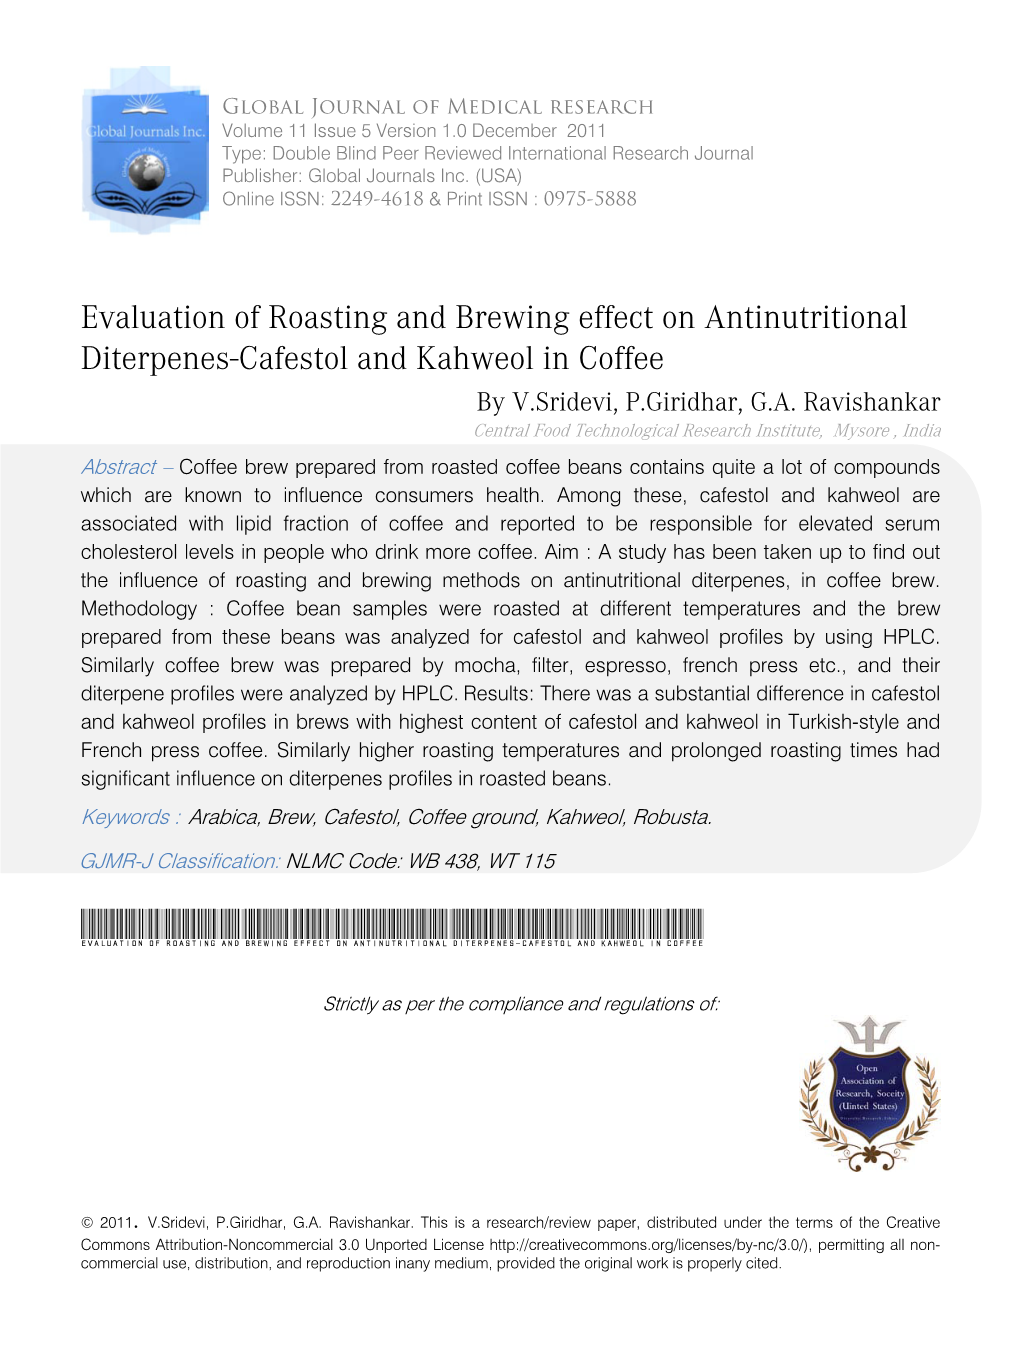 Evaluation of Roasting and Brewing Effect on Antinutritional Diterpenes-Cafestol and Kahweol in Coffee by V.Sridevi, P.Giridhar, G.A